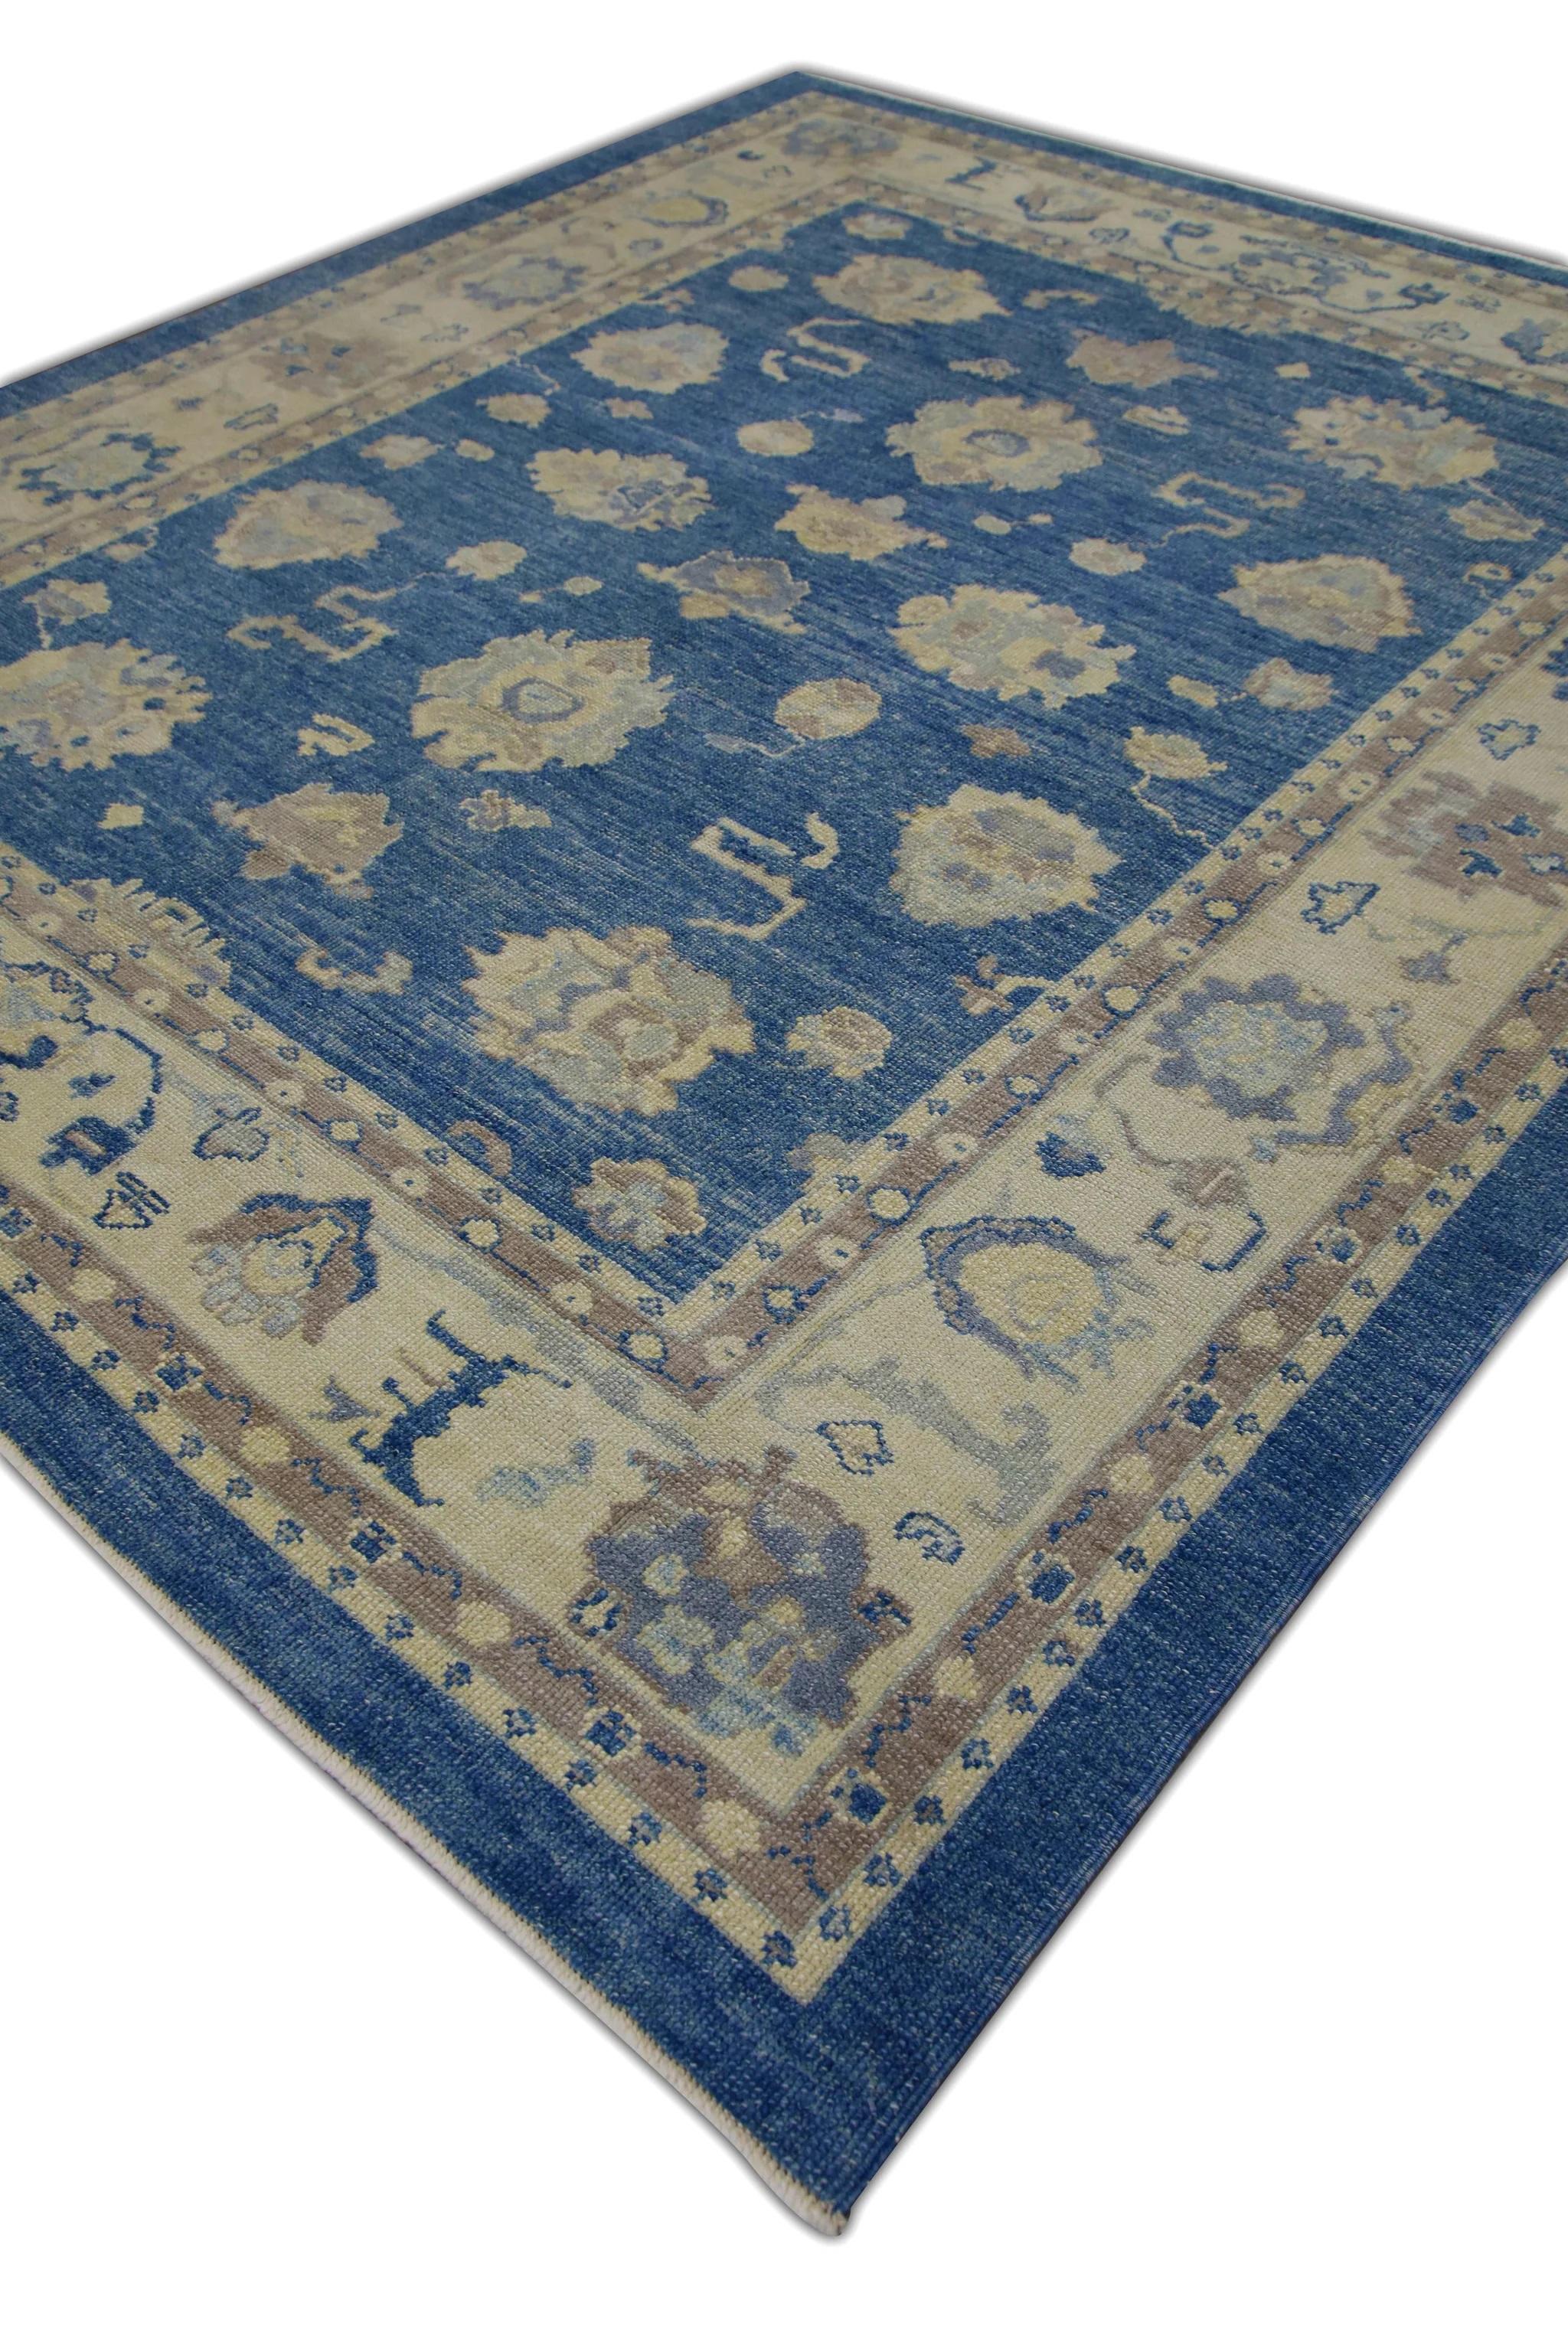 Floral Handwoven Wool Turkish Oushak Rug in Blue and Cream 8'9